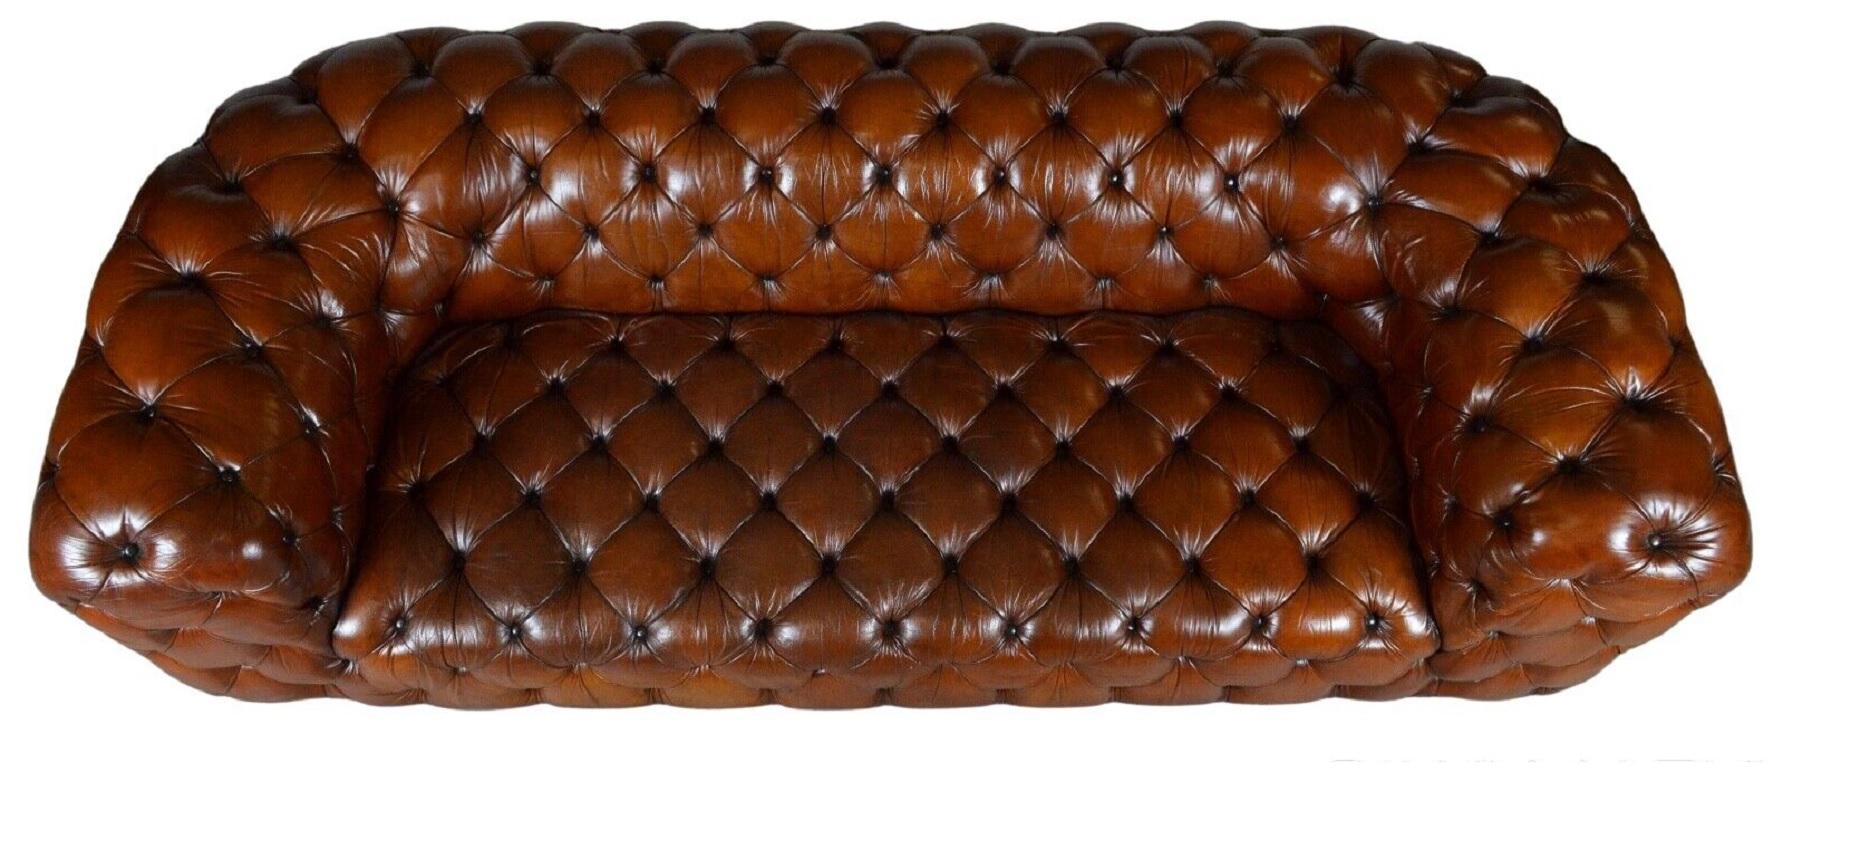 Fully Restored Hand Dyed Whisky Brown Leather Sofa Timothy Oulton Tribeca Tufted 2